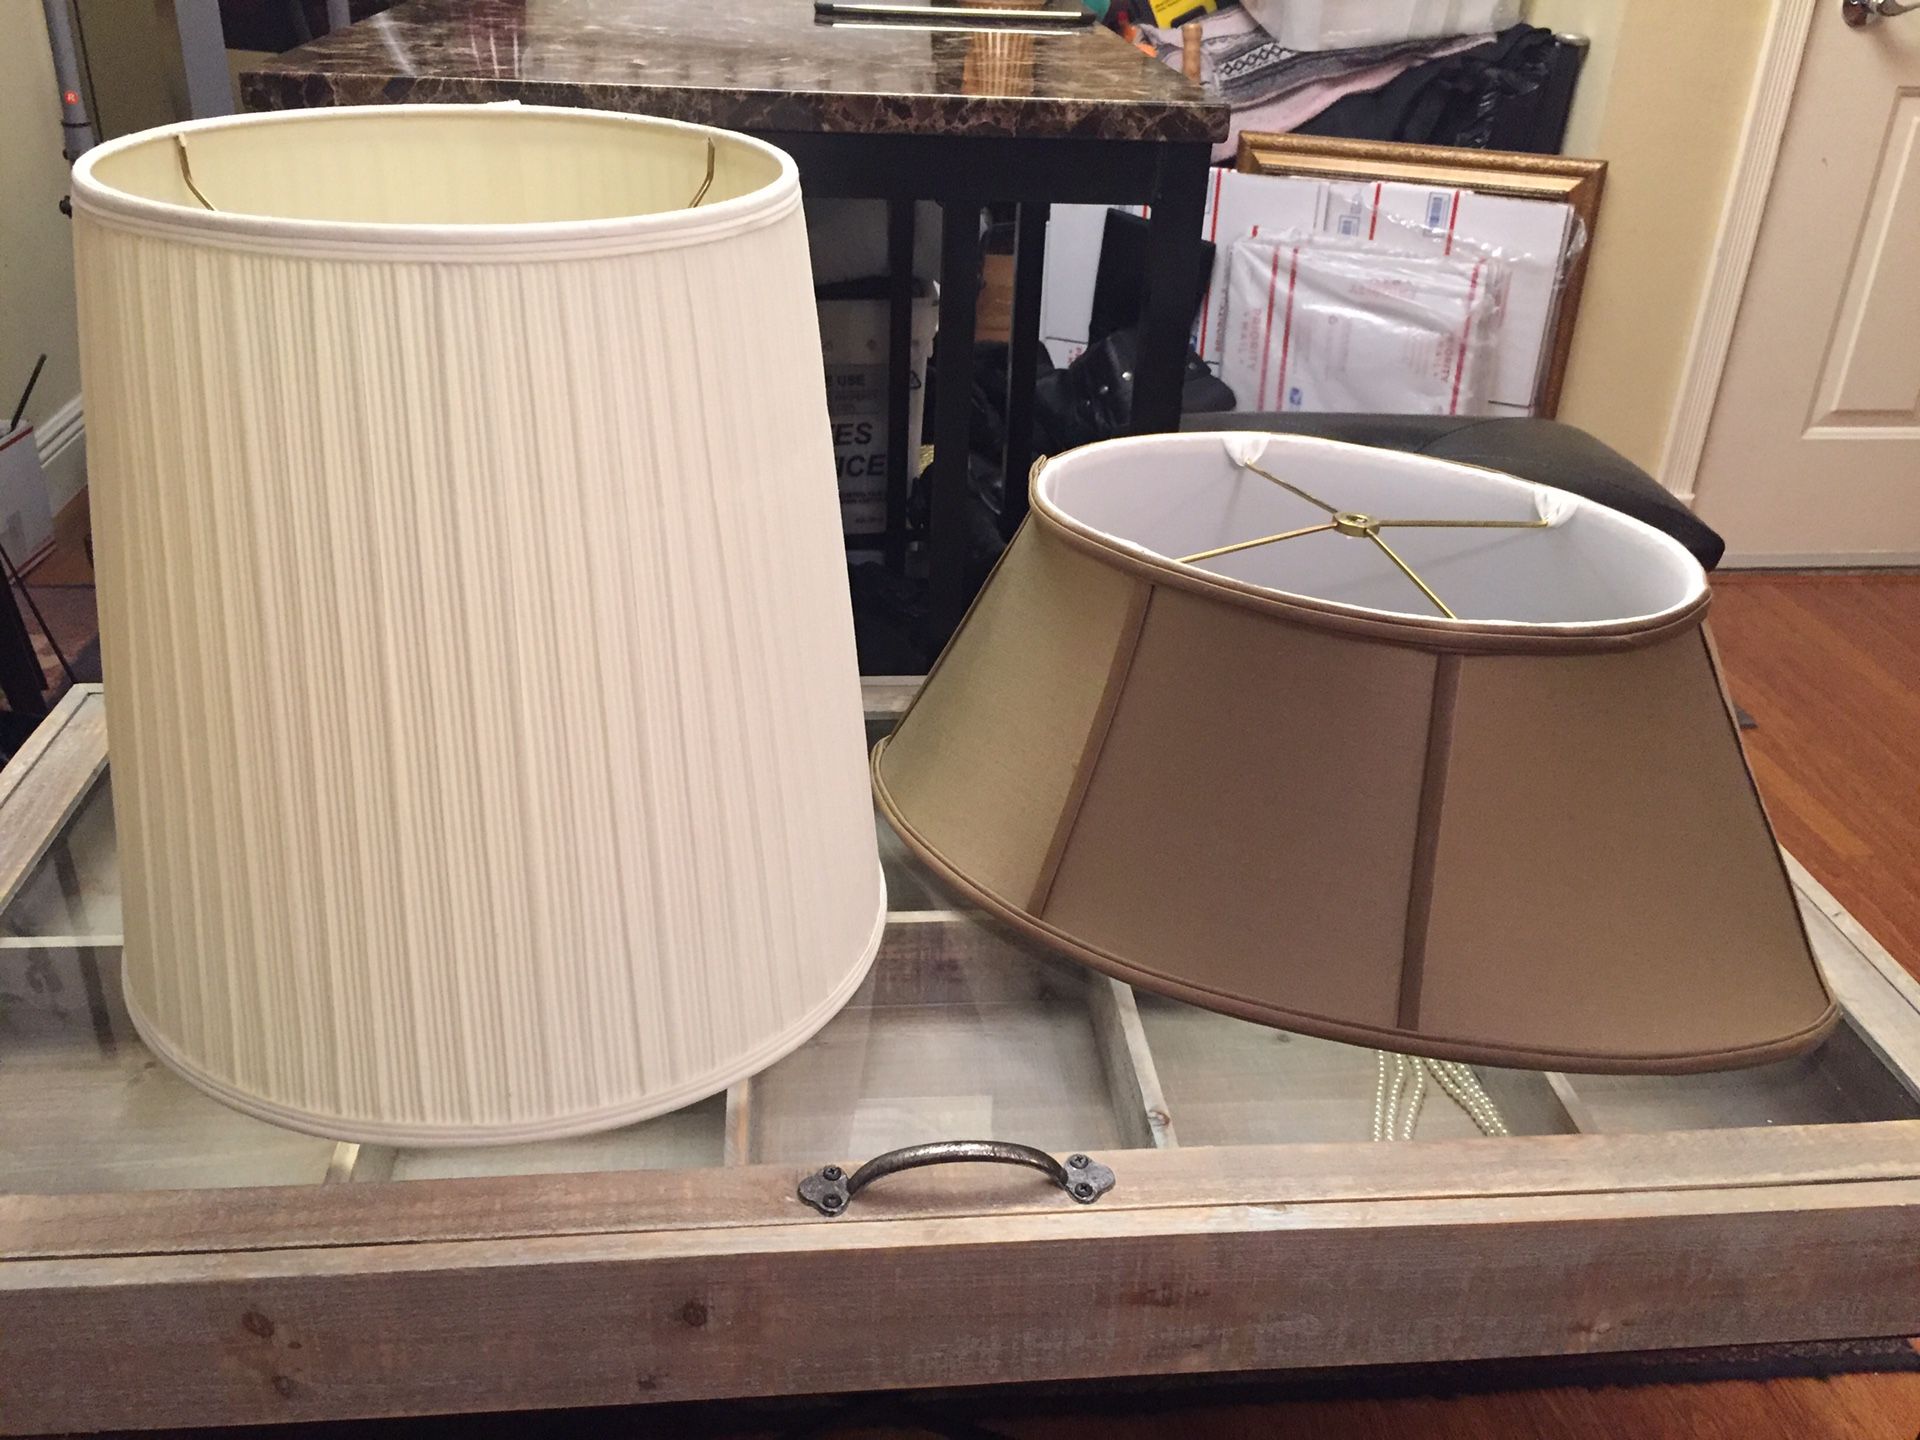 PAIR VINTAGE LAMP SHADES - ONE PLEATED ONE BEIGE SILKY OBLONG - SOLD TOGETHER!